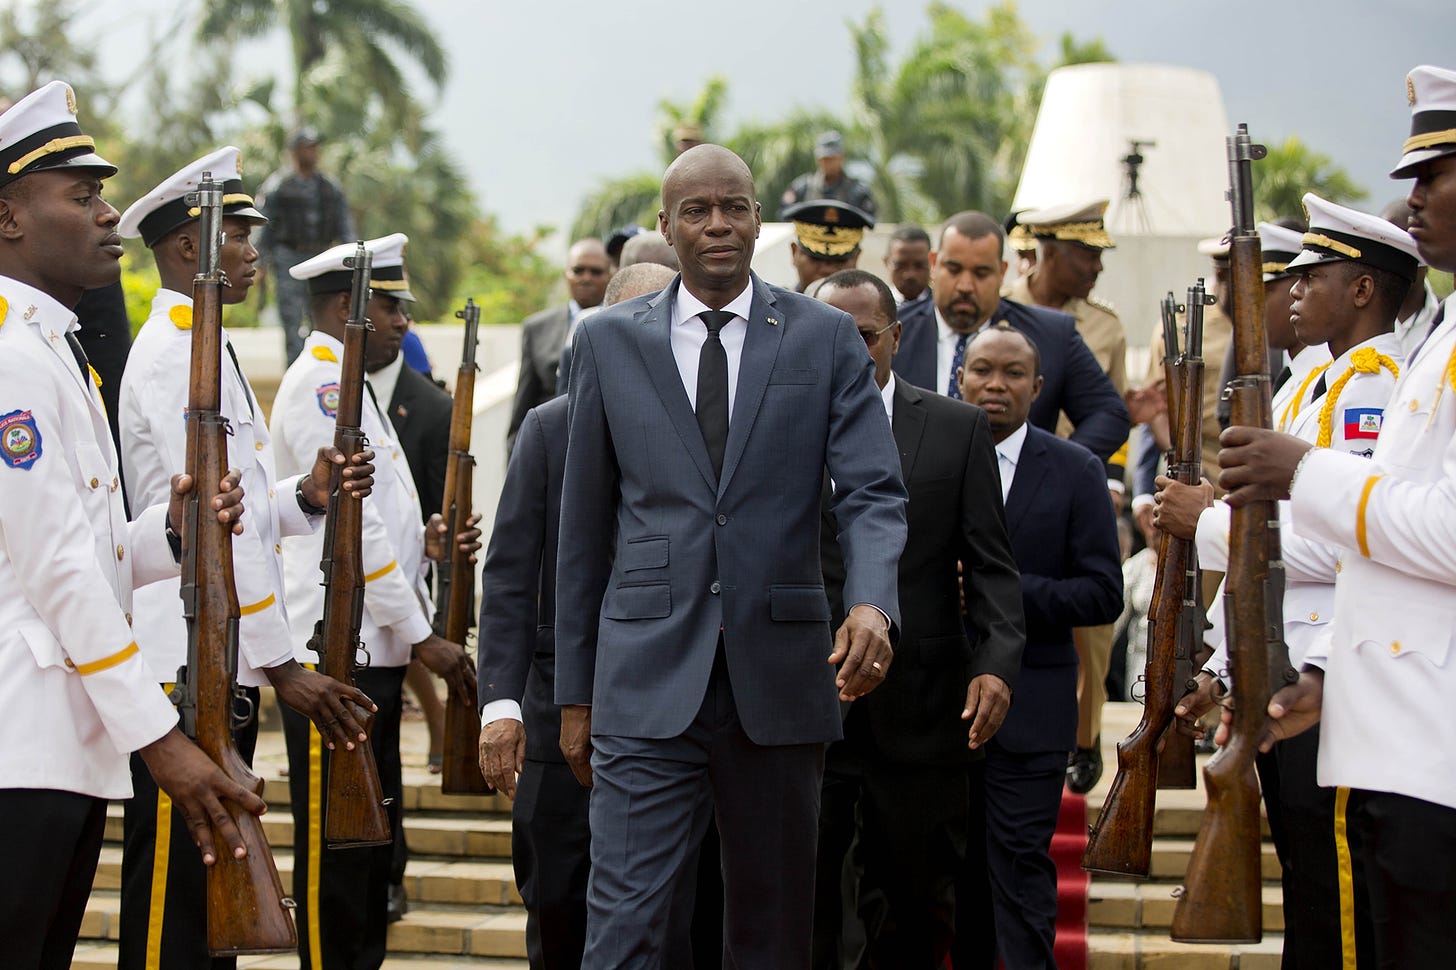 Who was Jovenel Moïse, the assassinated Haitian president?